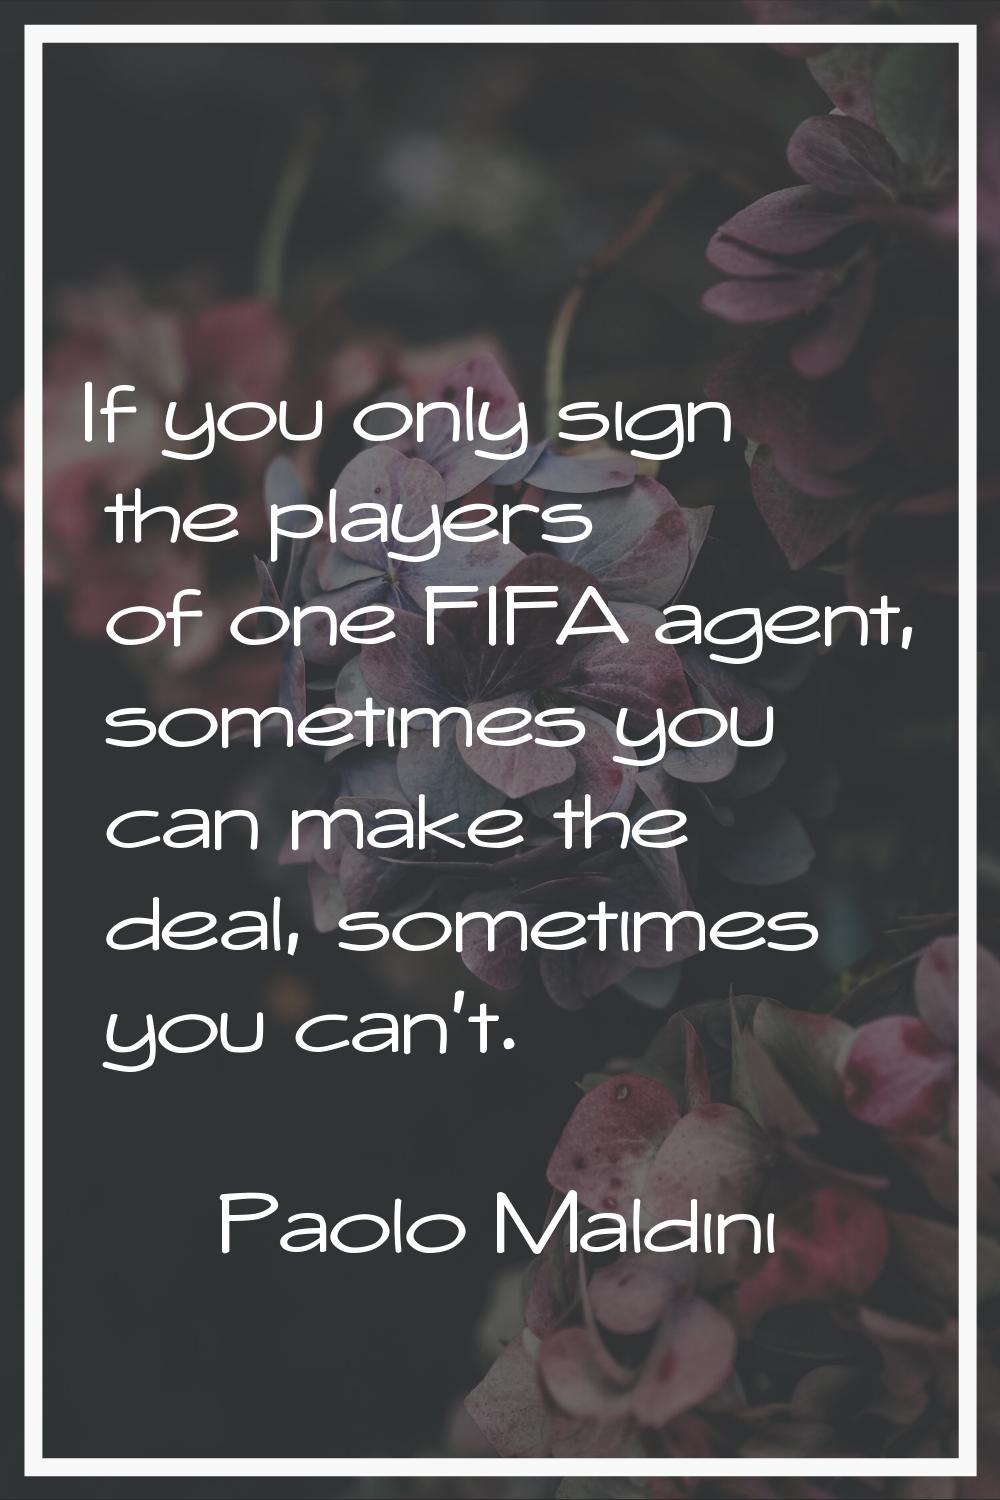 If you only sign the players of one FIFA agent, sometimes you can make the deal, sometimes you can'